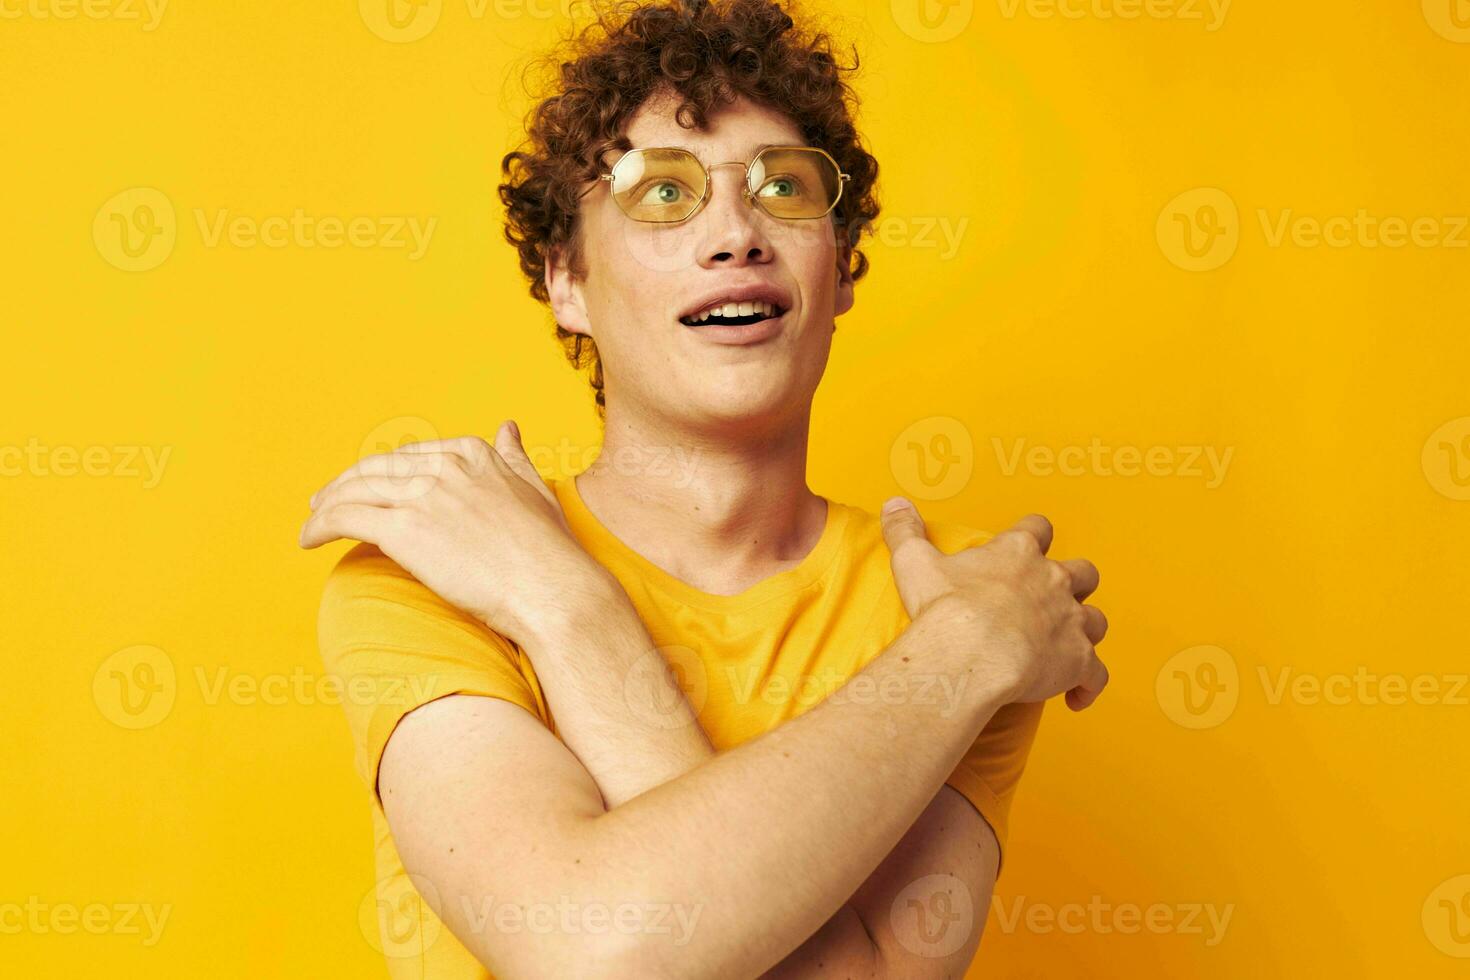 guy with red curly hair yellow t-shirt glasses fashion hand gestures yellow background unaltered photo